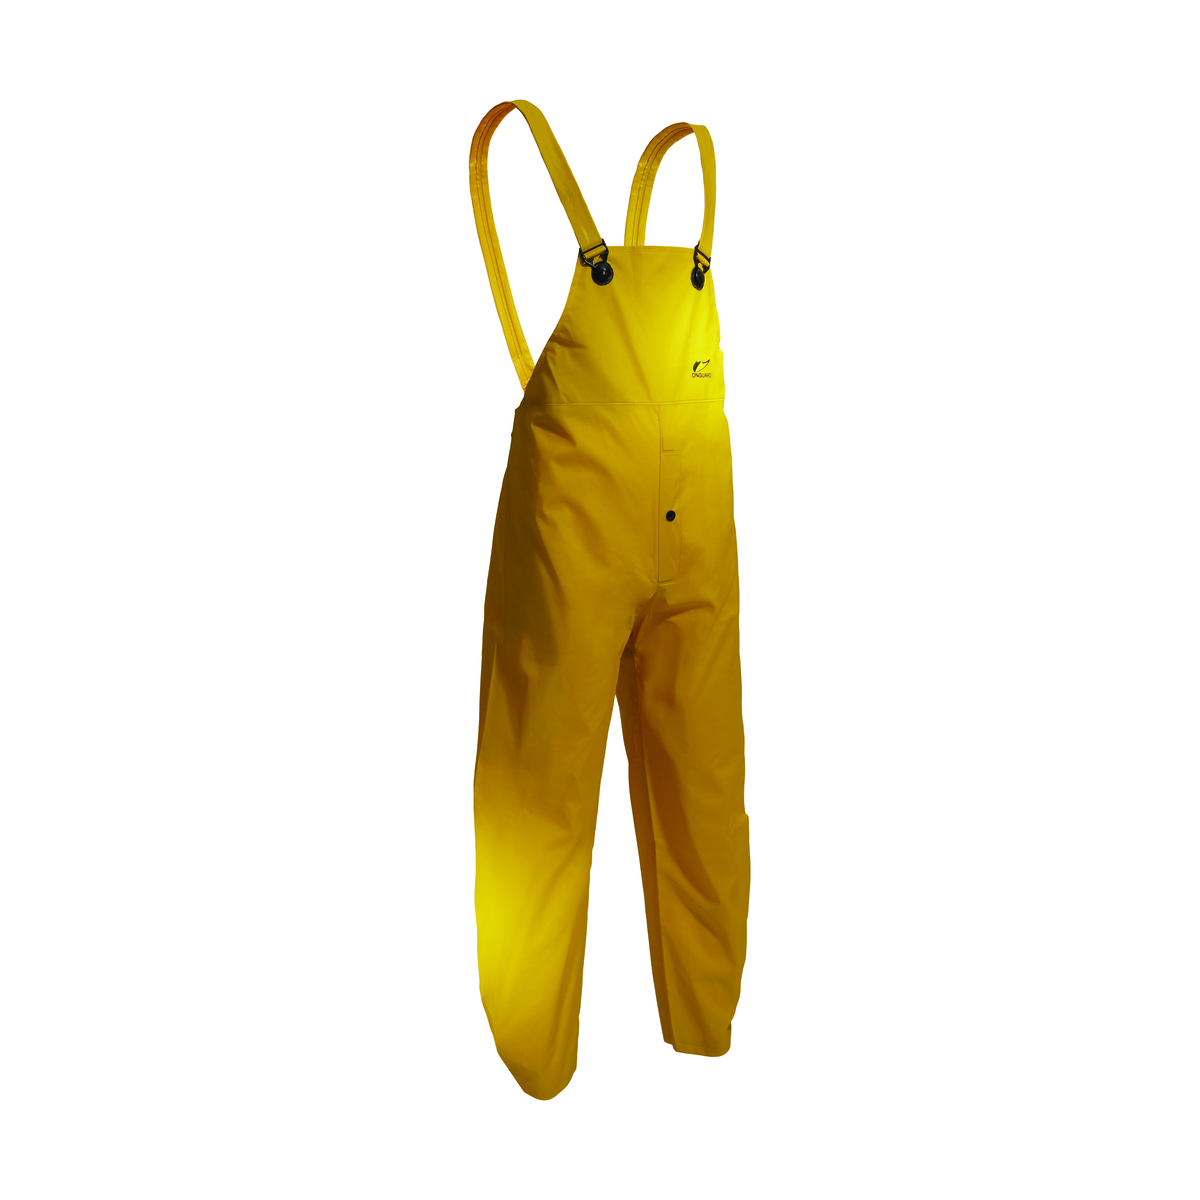 Dunlop® Protective Footwear 5X Yellow Sitex Polyester/PVC Rain Suit